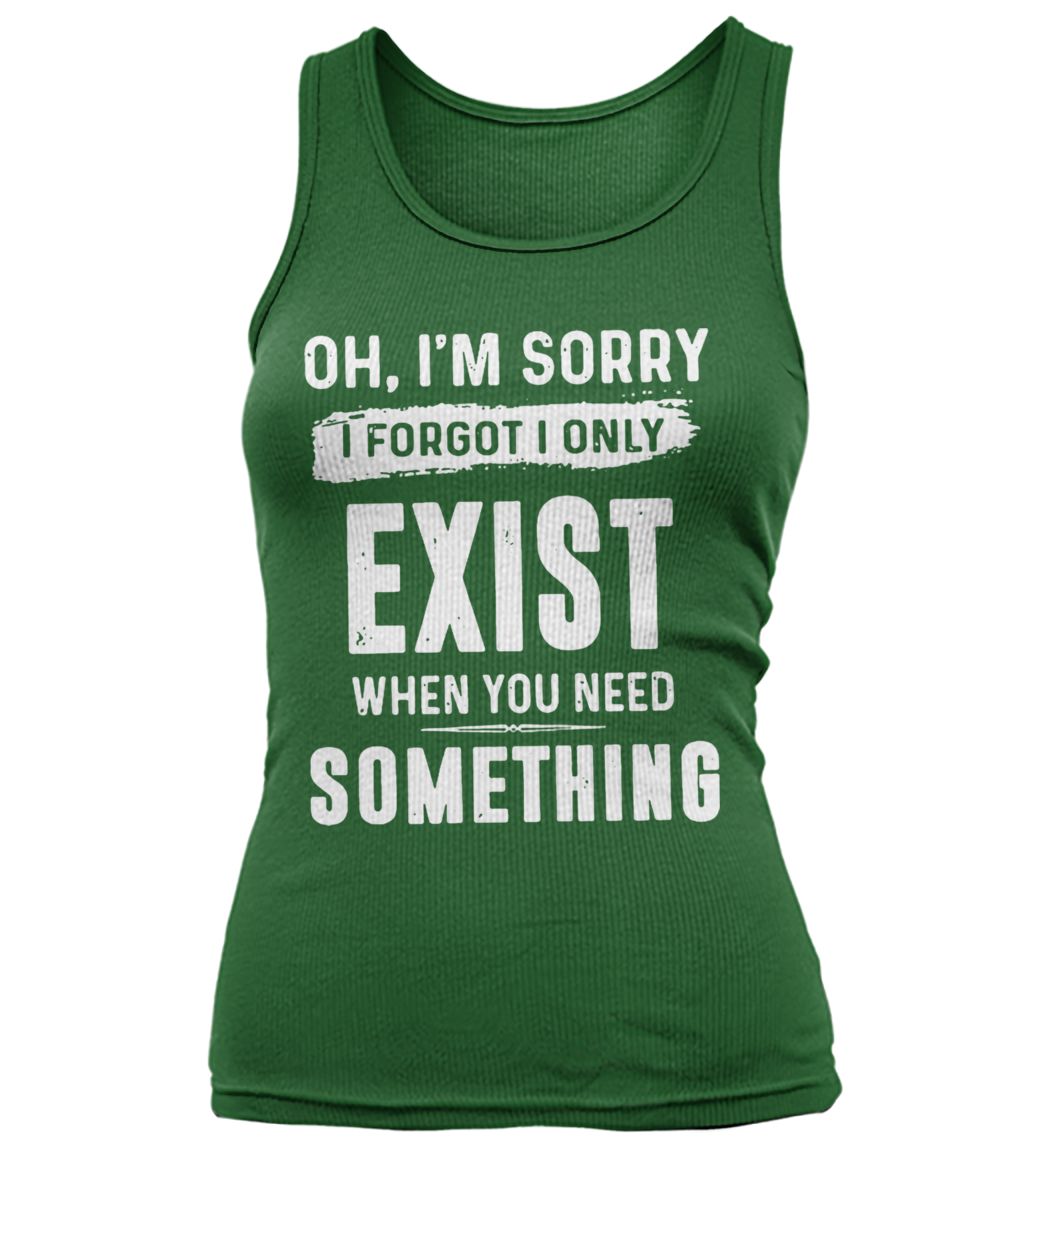 Oh I'm sorry I forgot I only exist when you need something women's tank top